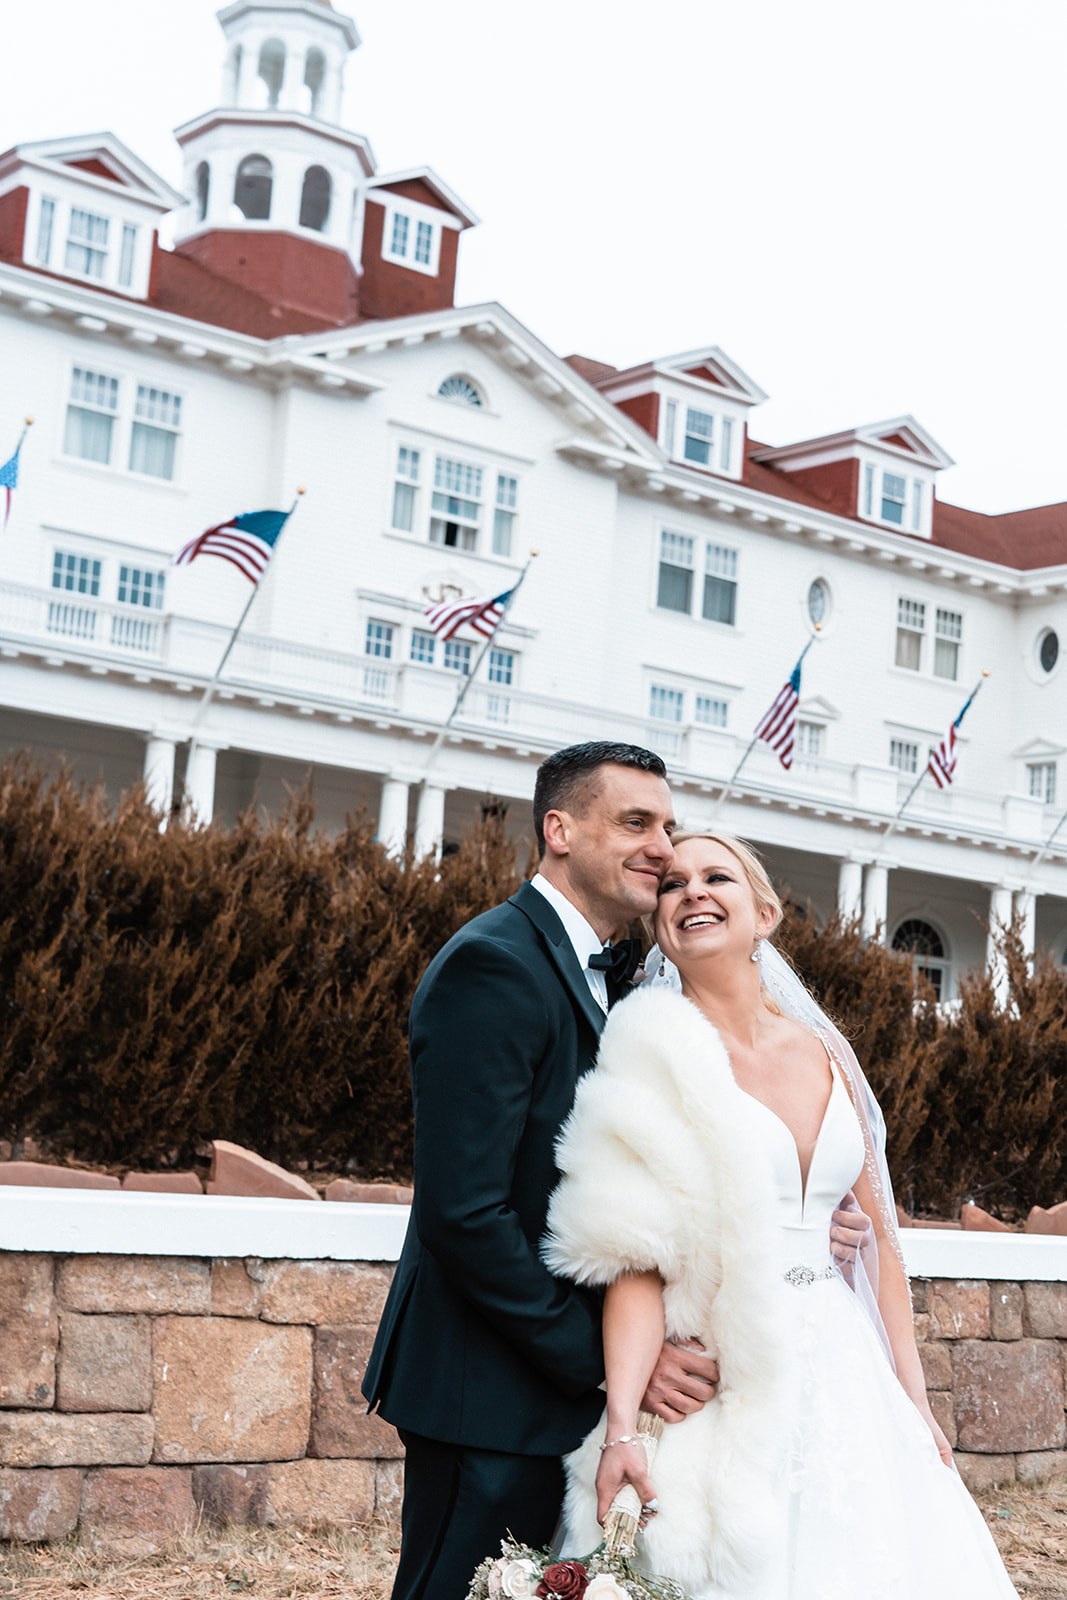 Beautiful bride and groom posing smiling at one another in front of the Stanley Hotel in Estes Park